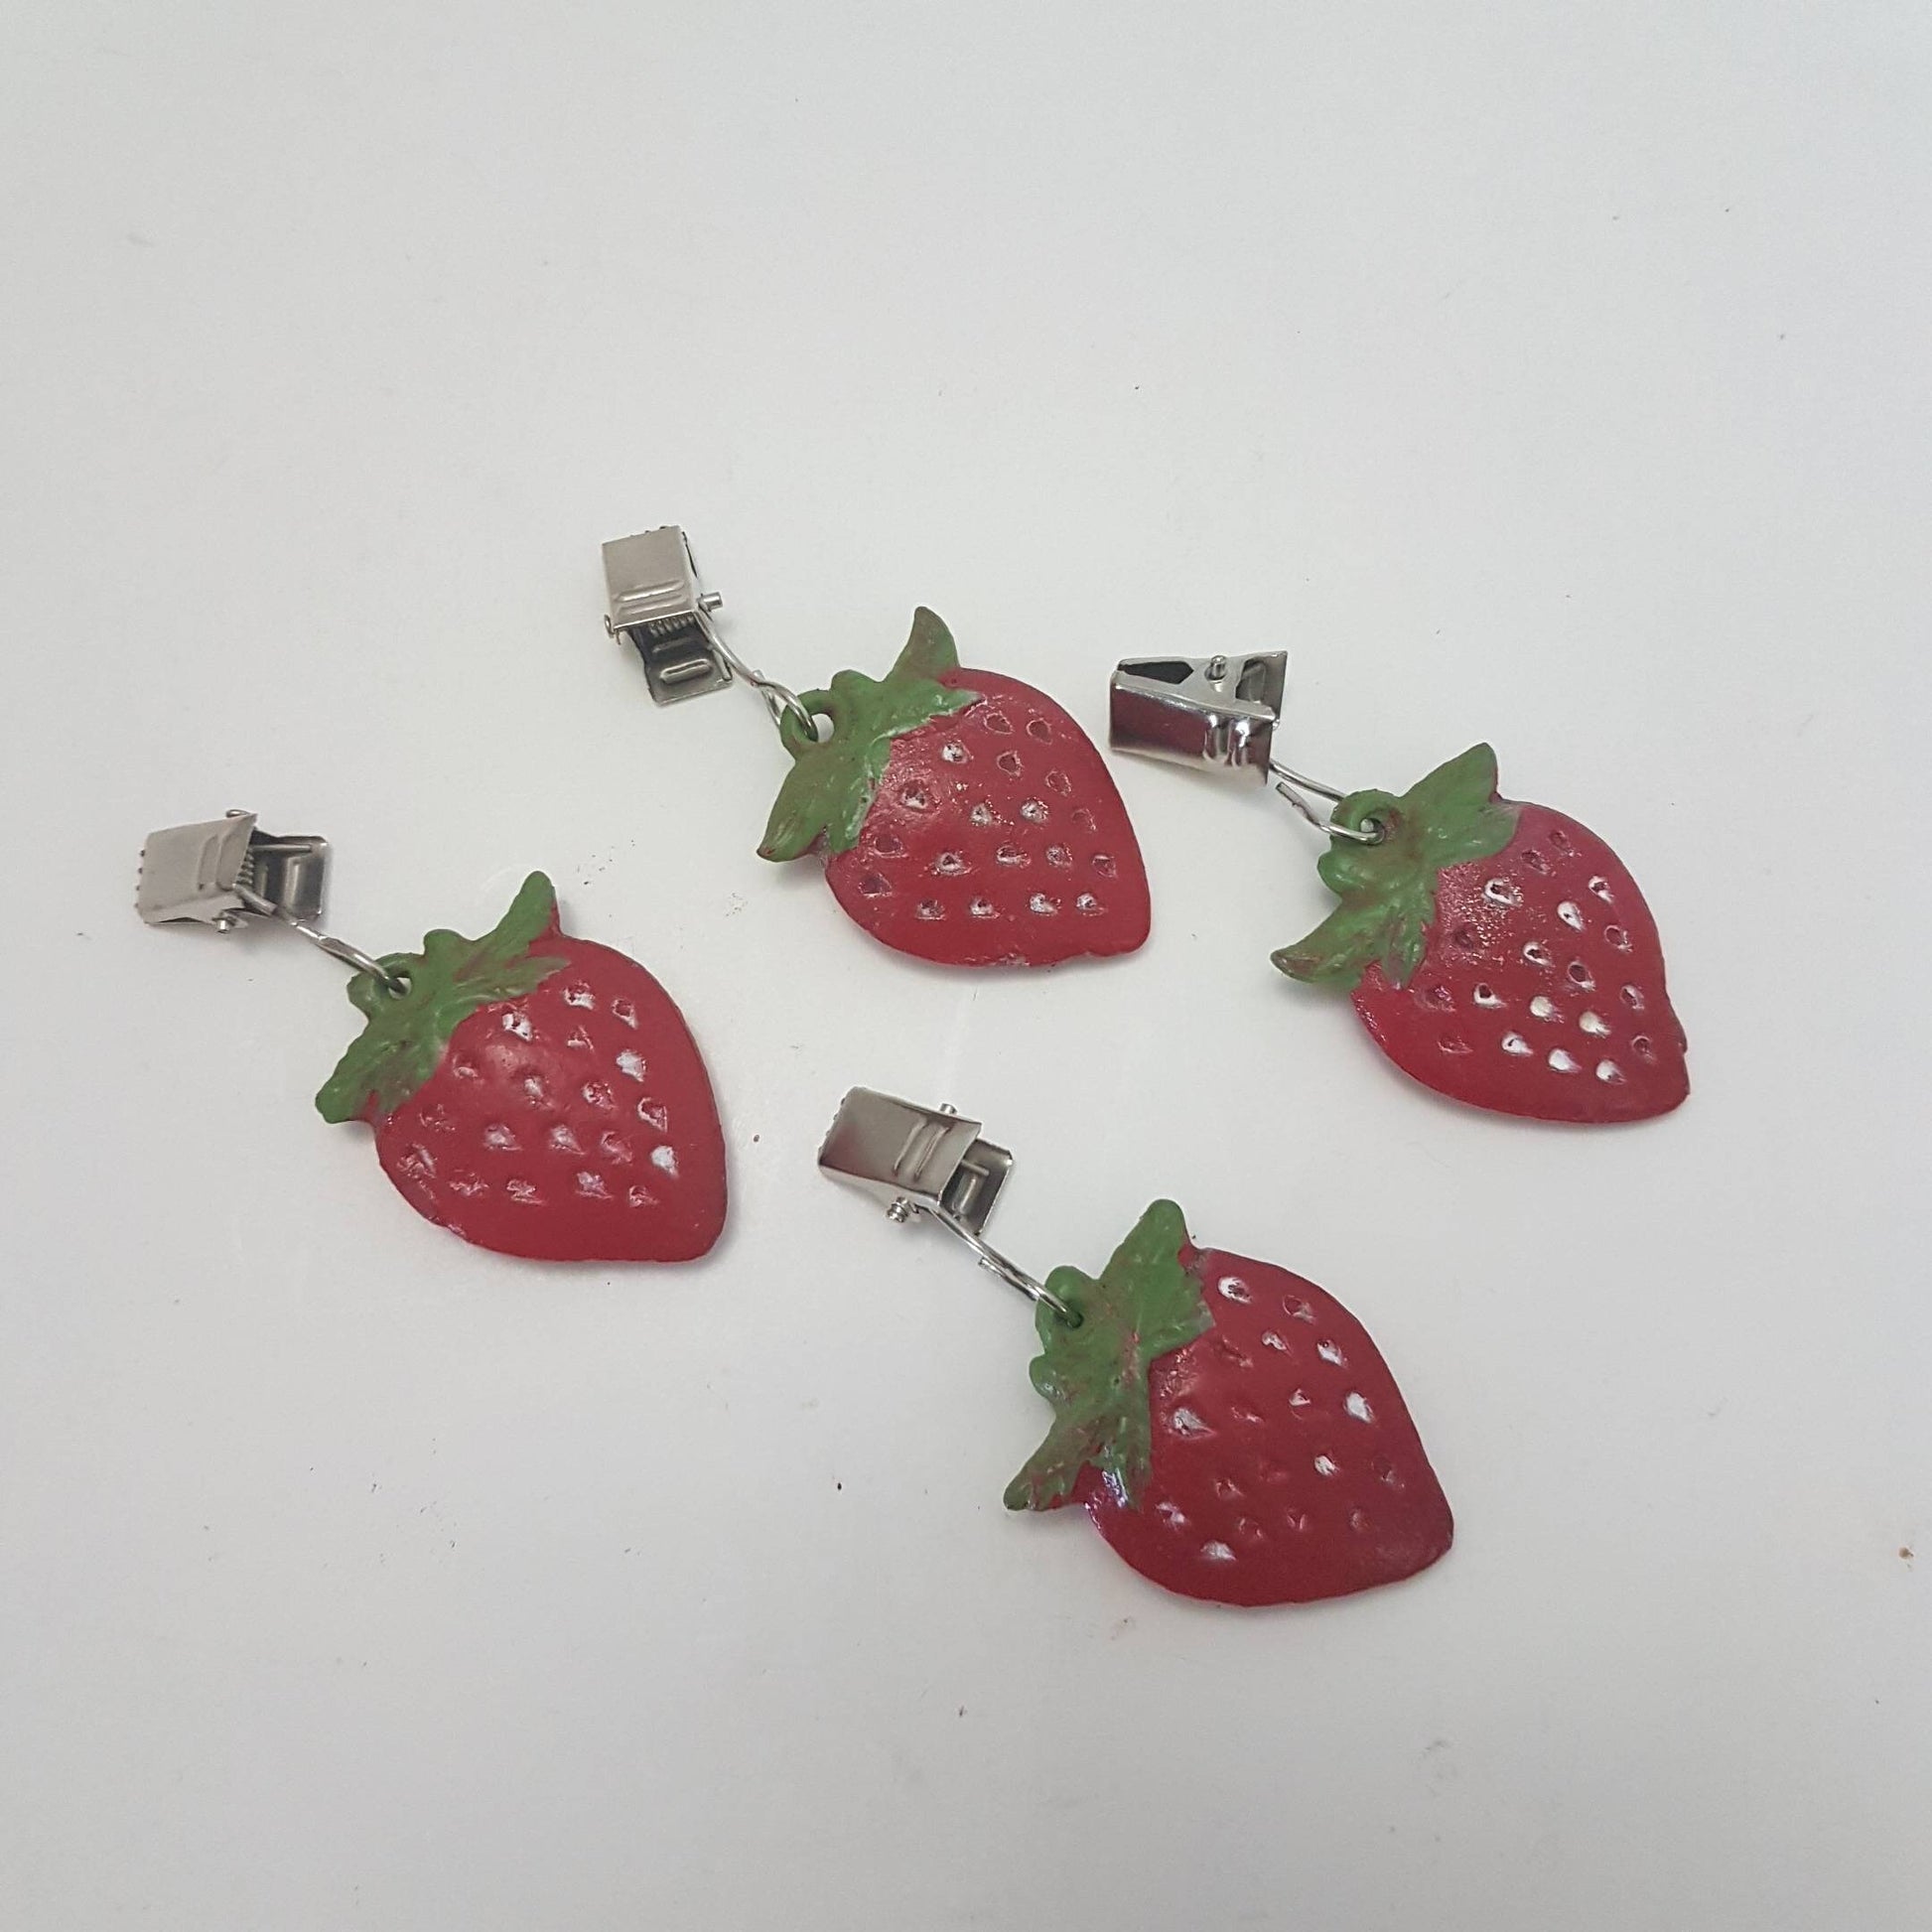 tablecloth weights patio table weights strawberries